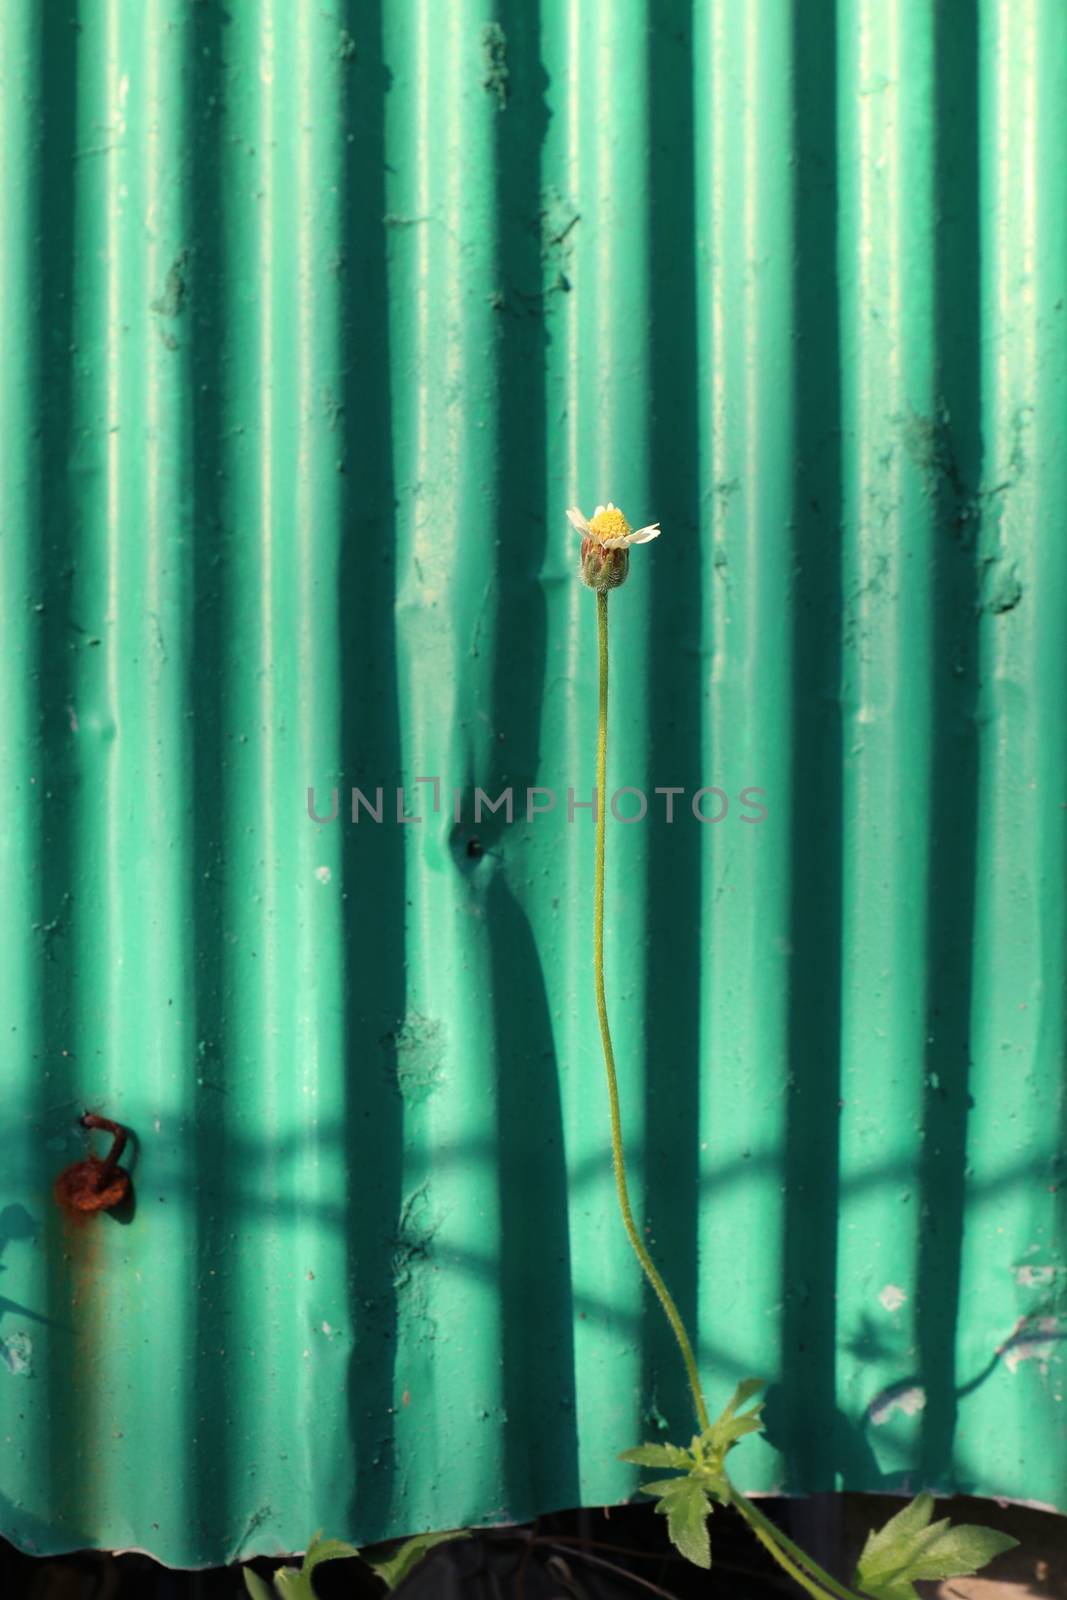 Grass, small flowers beside the fence, galvanized sheet, Small flowers on green galvanized sheet old background morning for design by cgdeaw